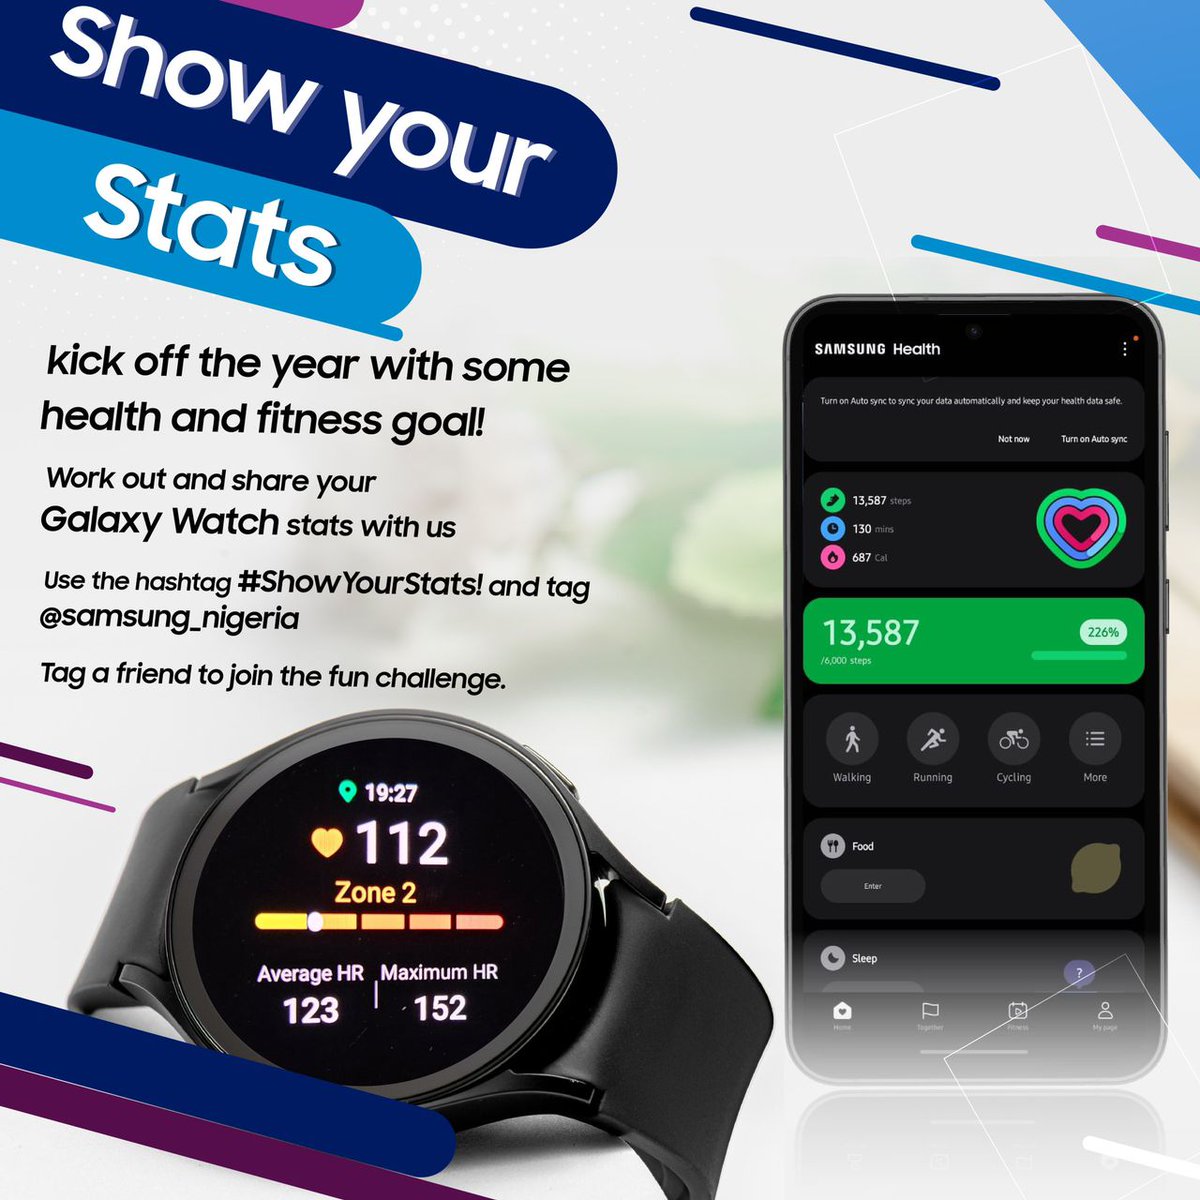 Invite your friends to join the challenge and have fun together
Join the #MyGalaxyStats challenge and show off your fitness goals.
Sync your health data from your Galaxy devices and tag @SamsungNigeria for a chance to win amazing prizes.